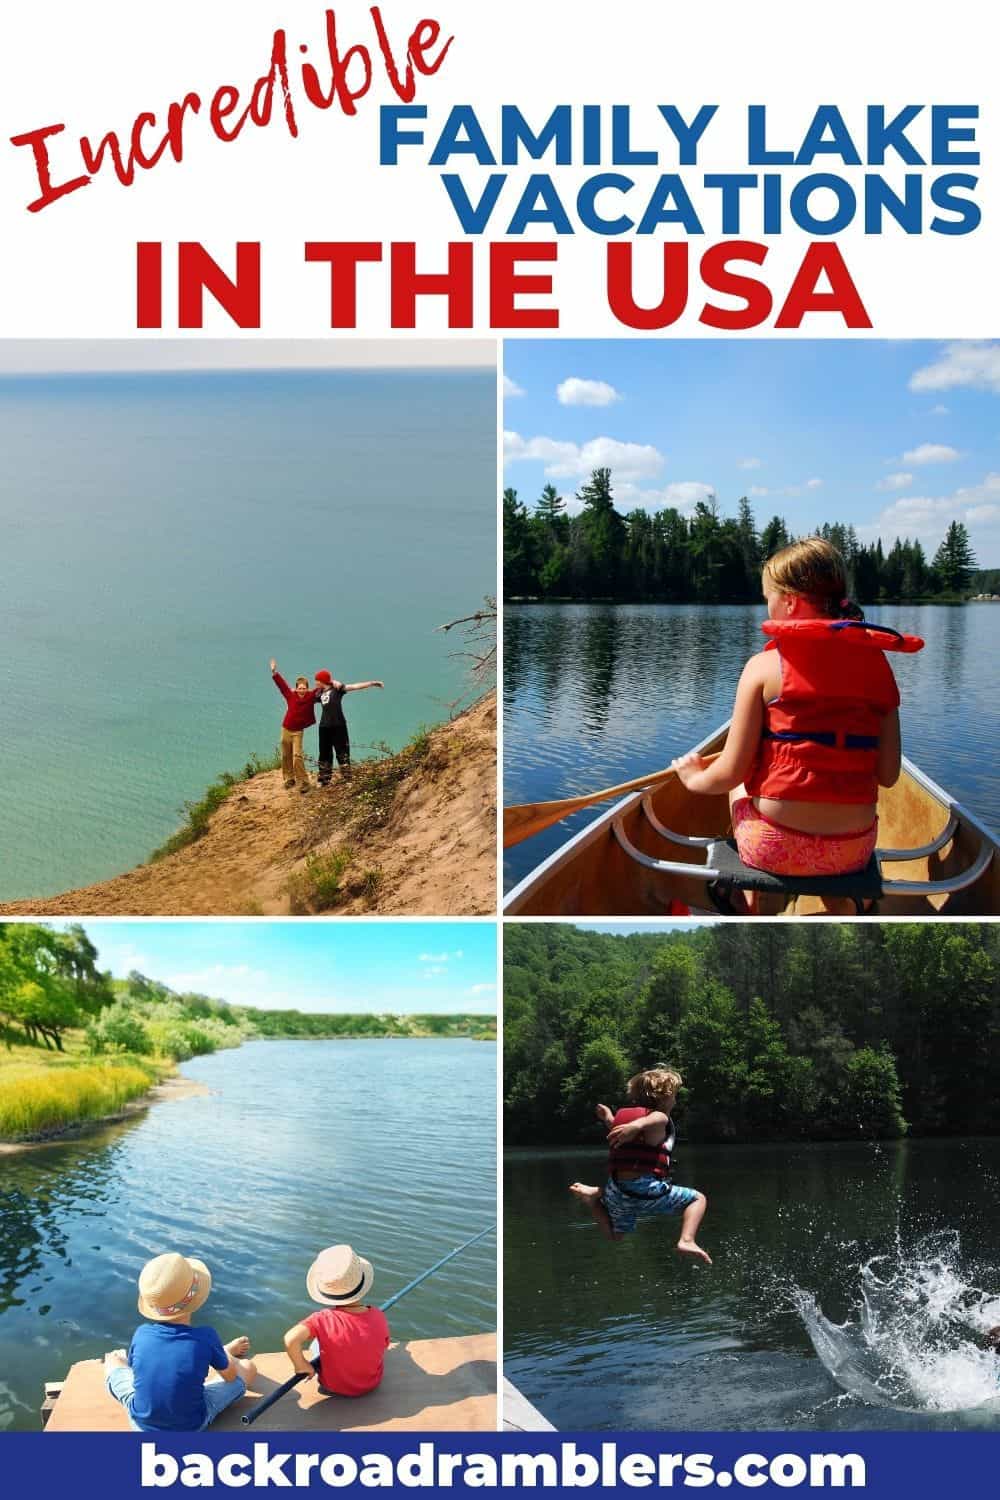 A collage of photos featuring kids recreating on lakes. Text overlay: Incredible family lake vacations in the USA.